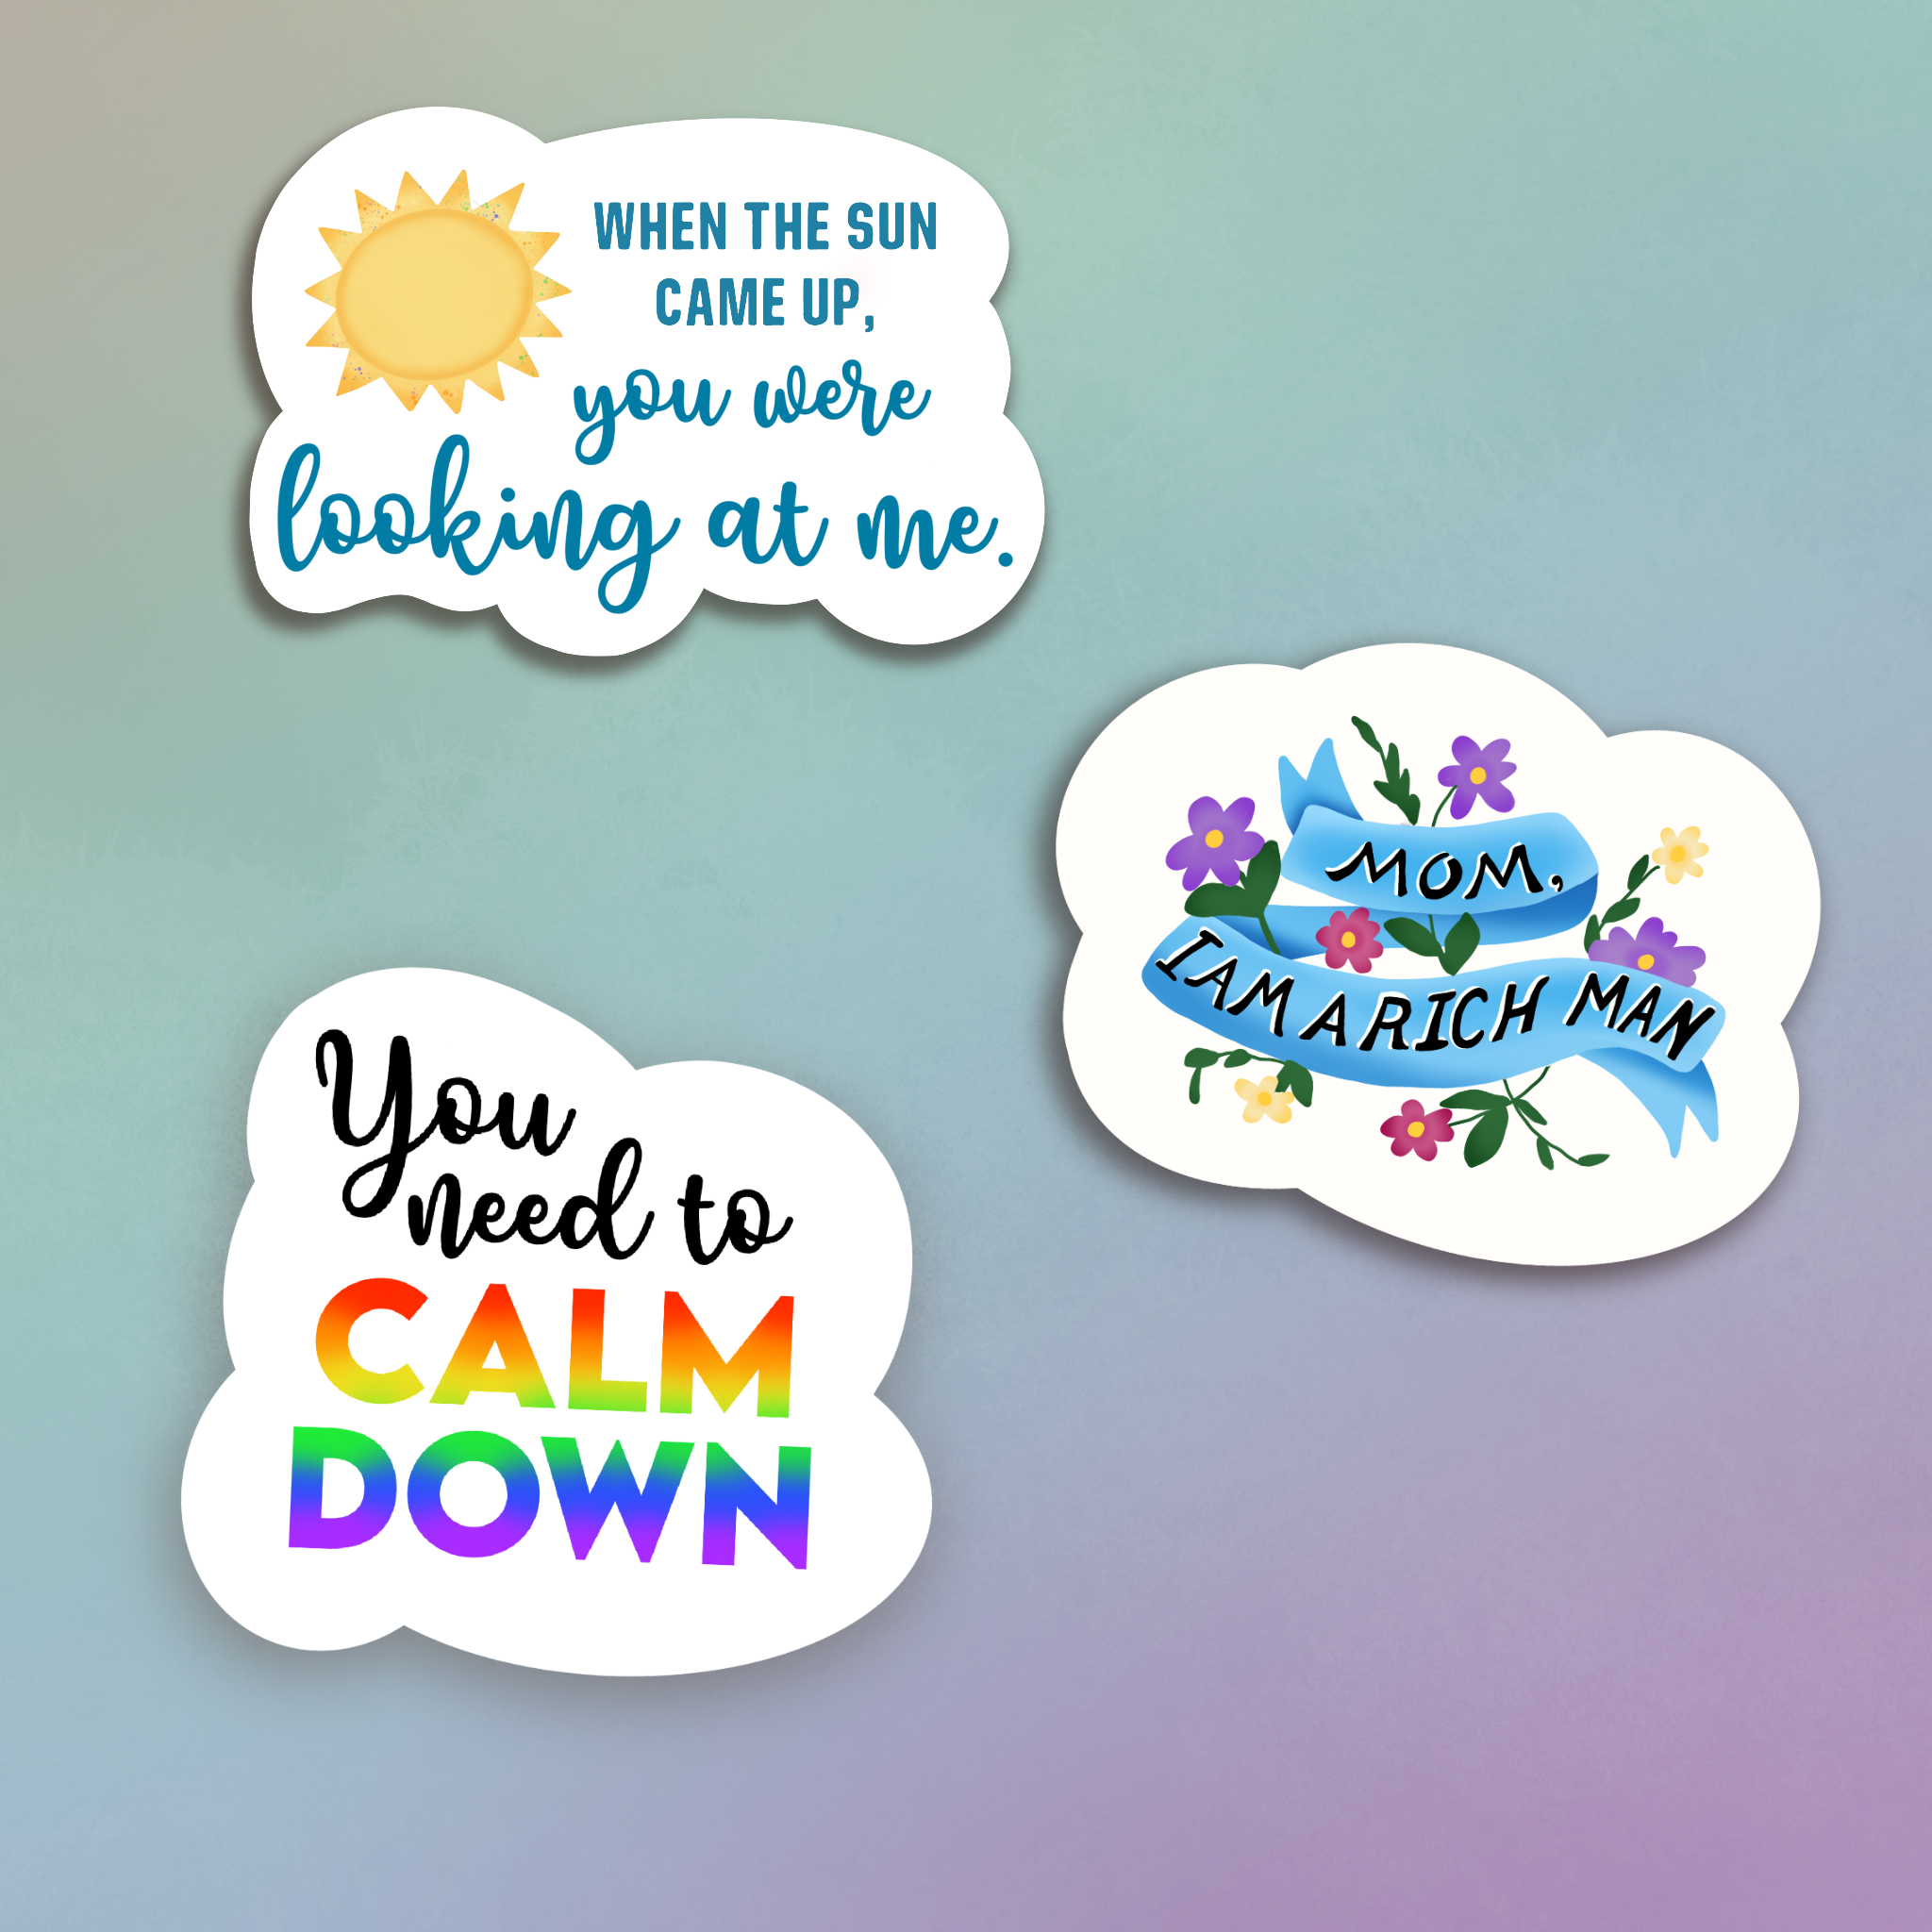 Taylor Swift Stickers